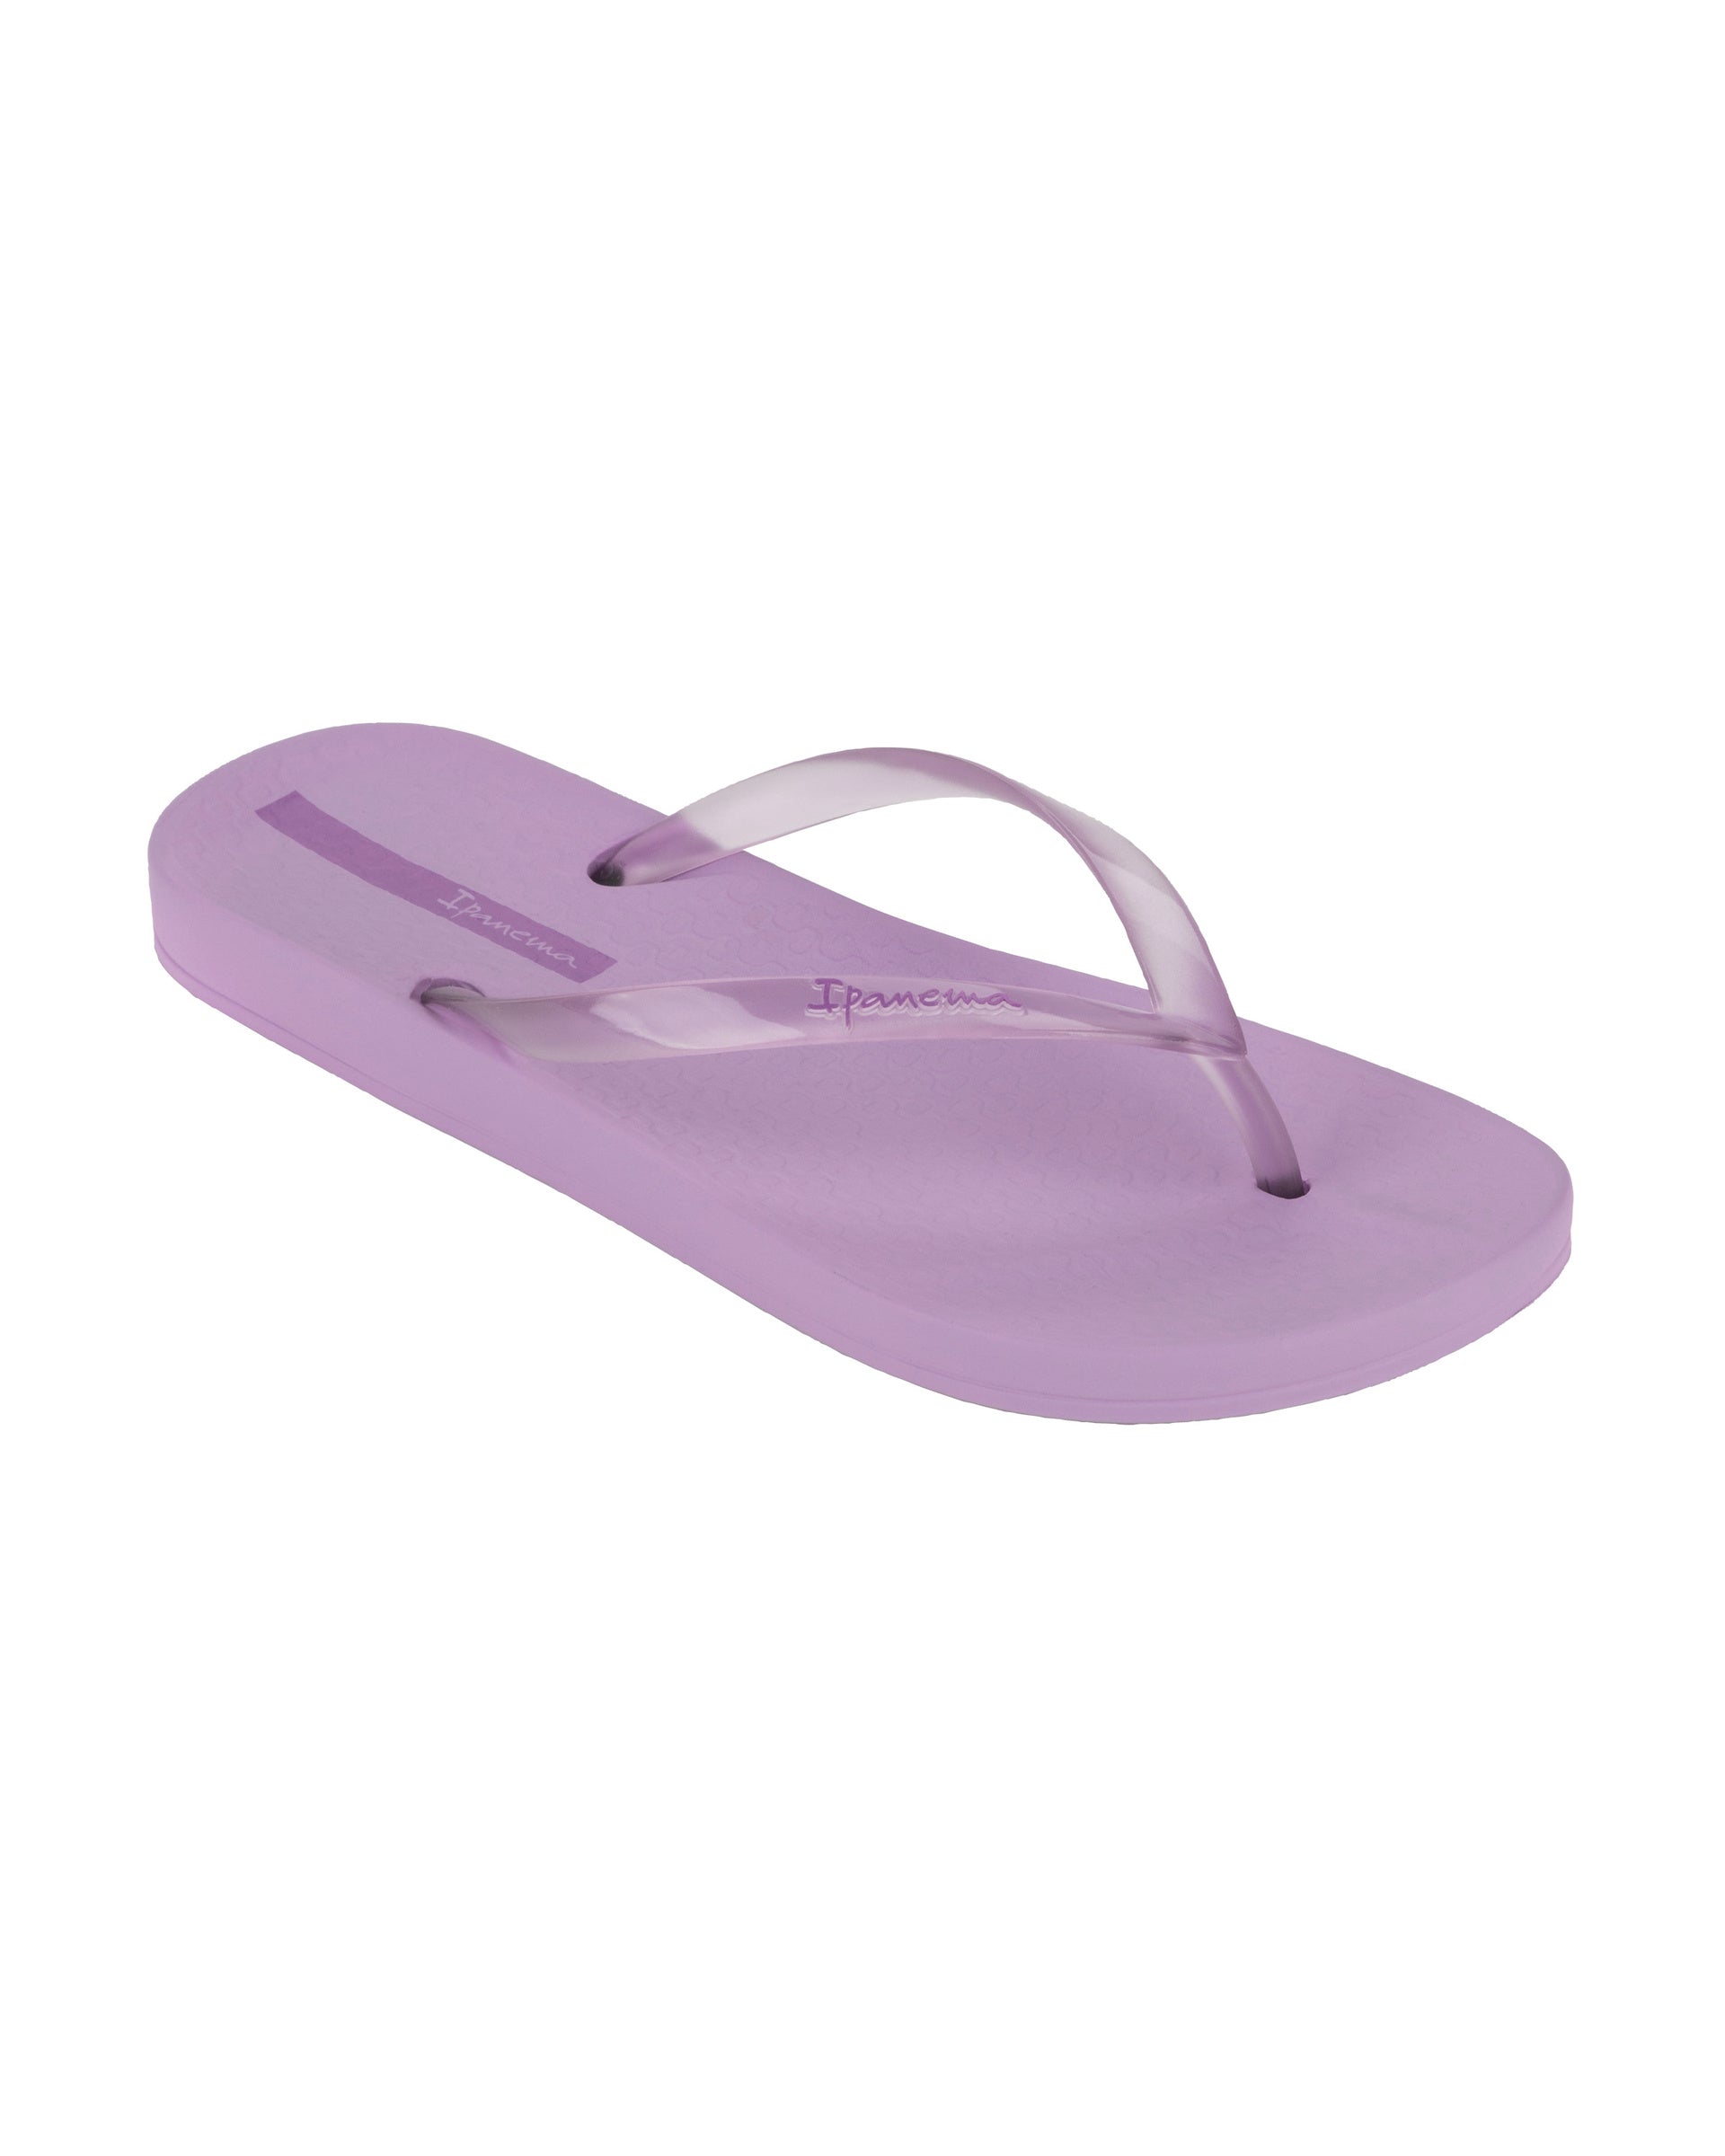 Angled view of a purple Ipanema Ana Connect women's flip flop with a clear purple strap.